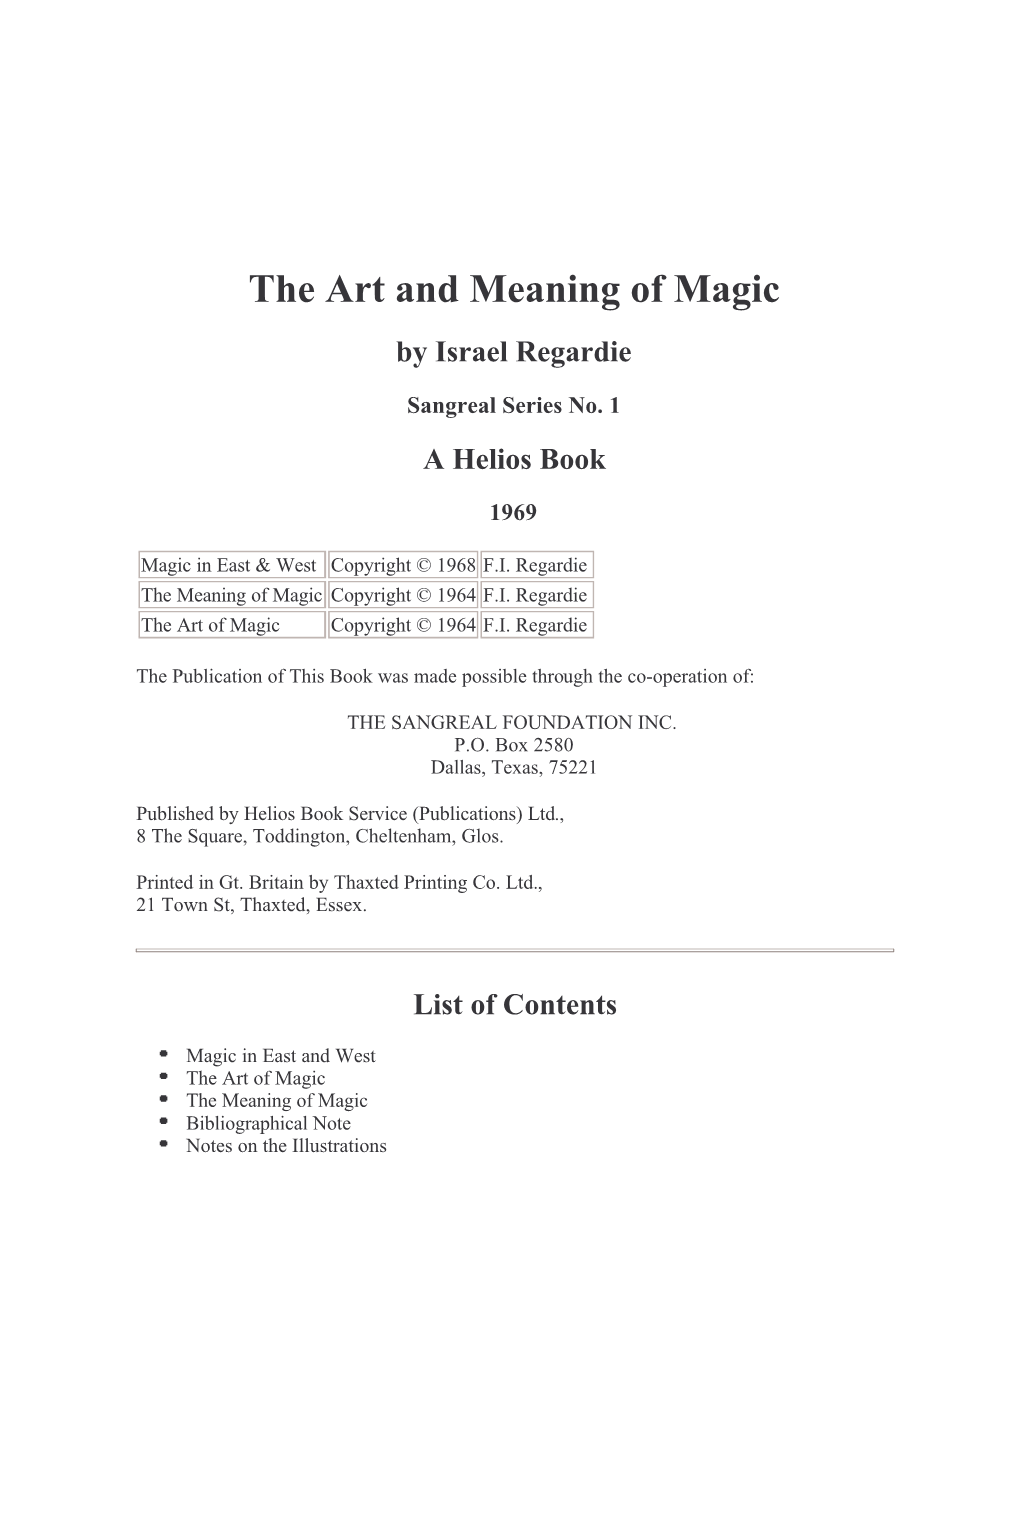 Art and Meaning of Magick